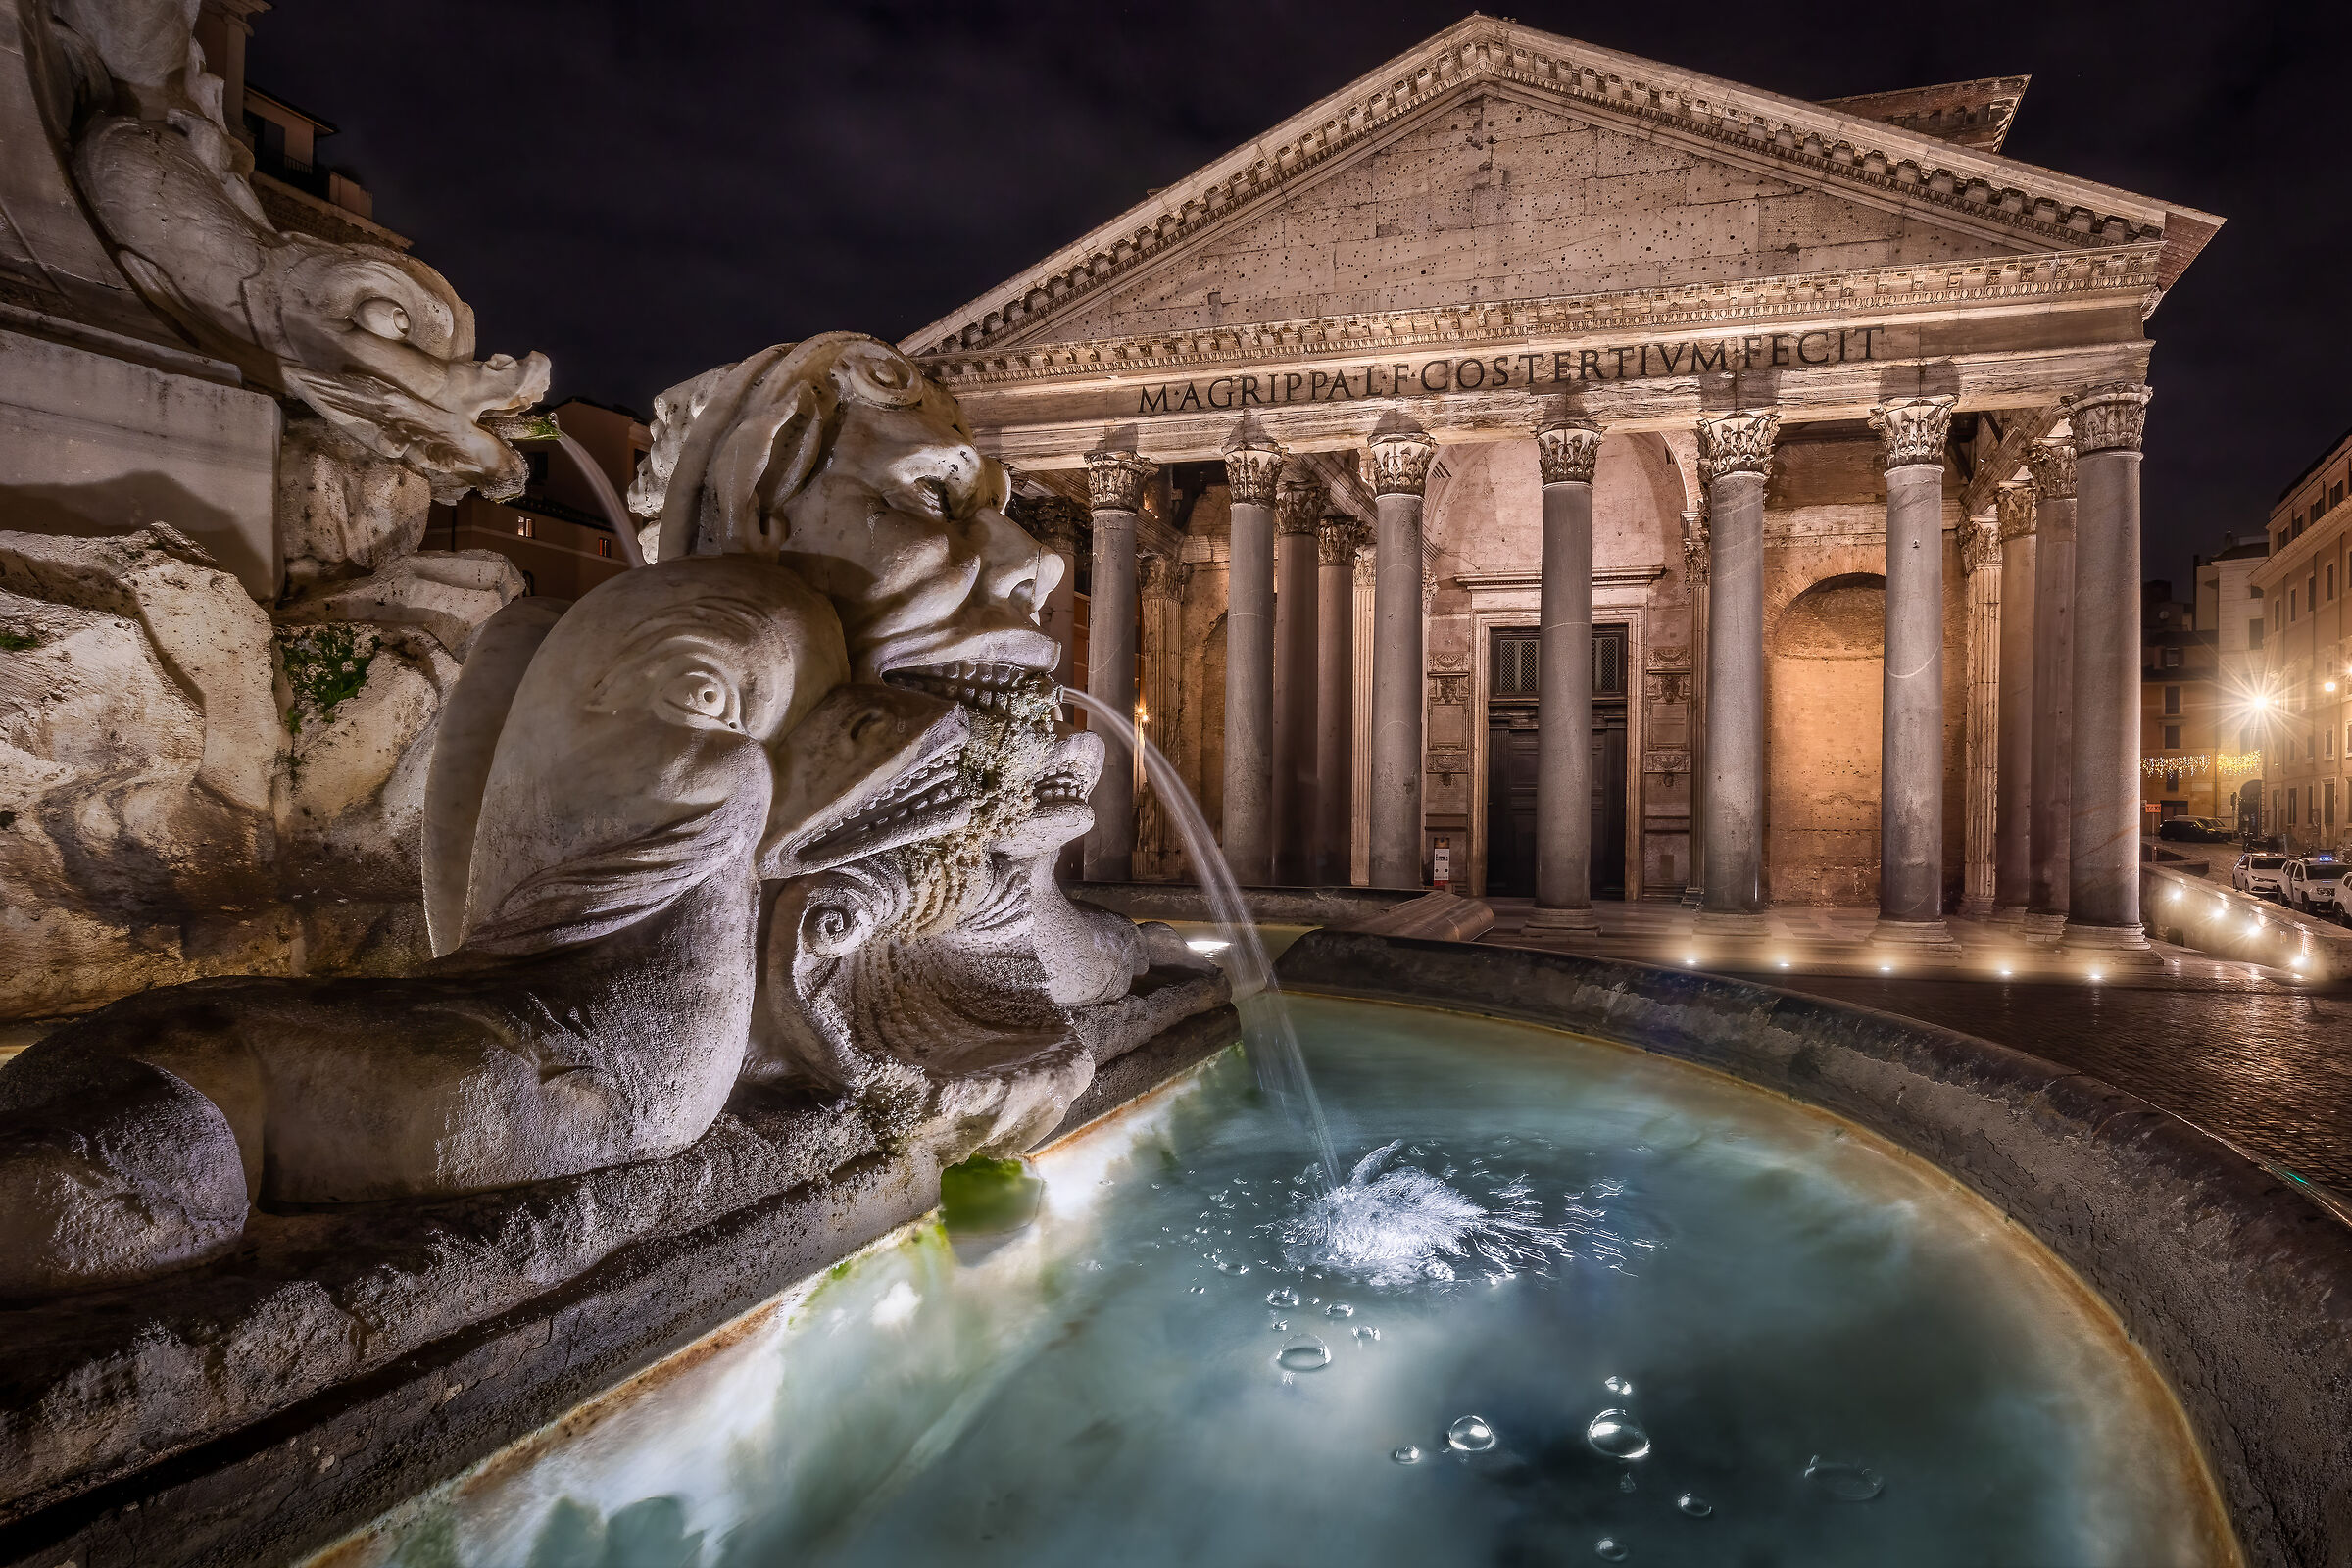 The fountain of the Pantheon...